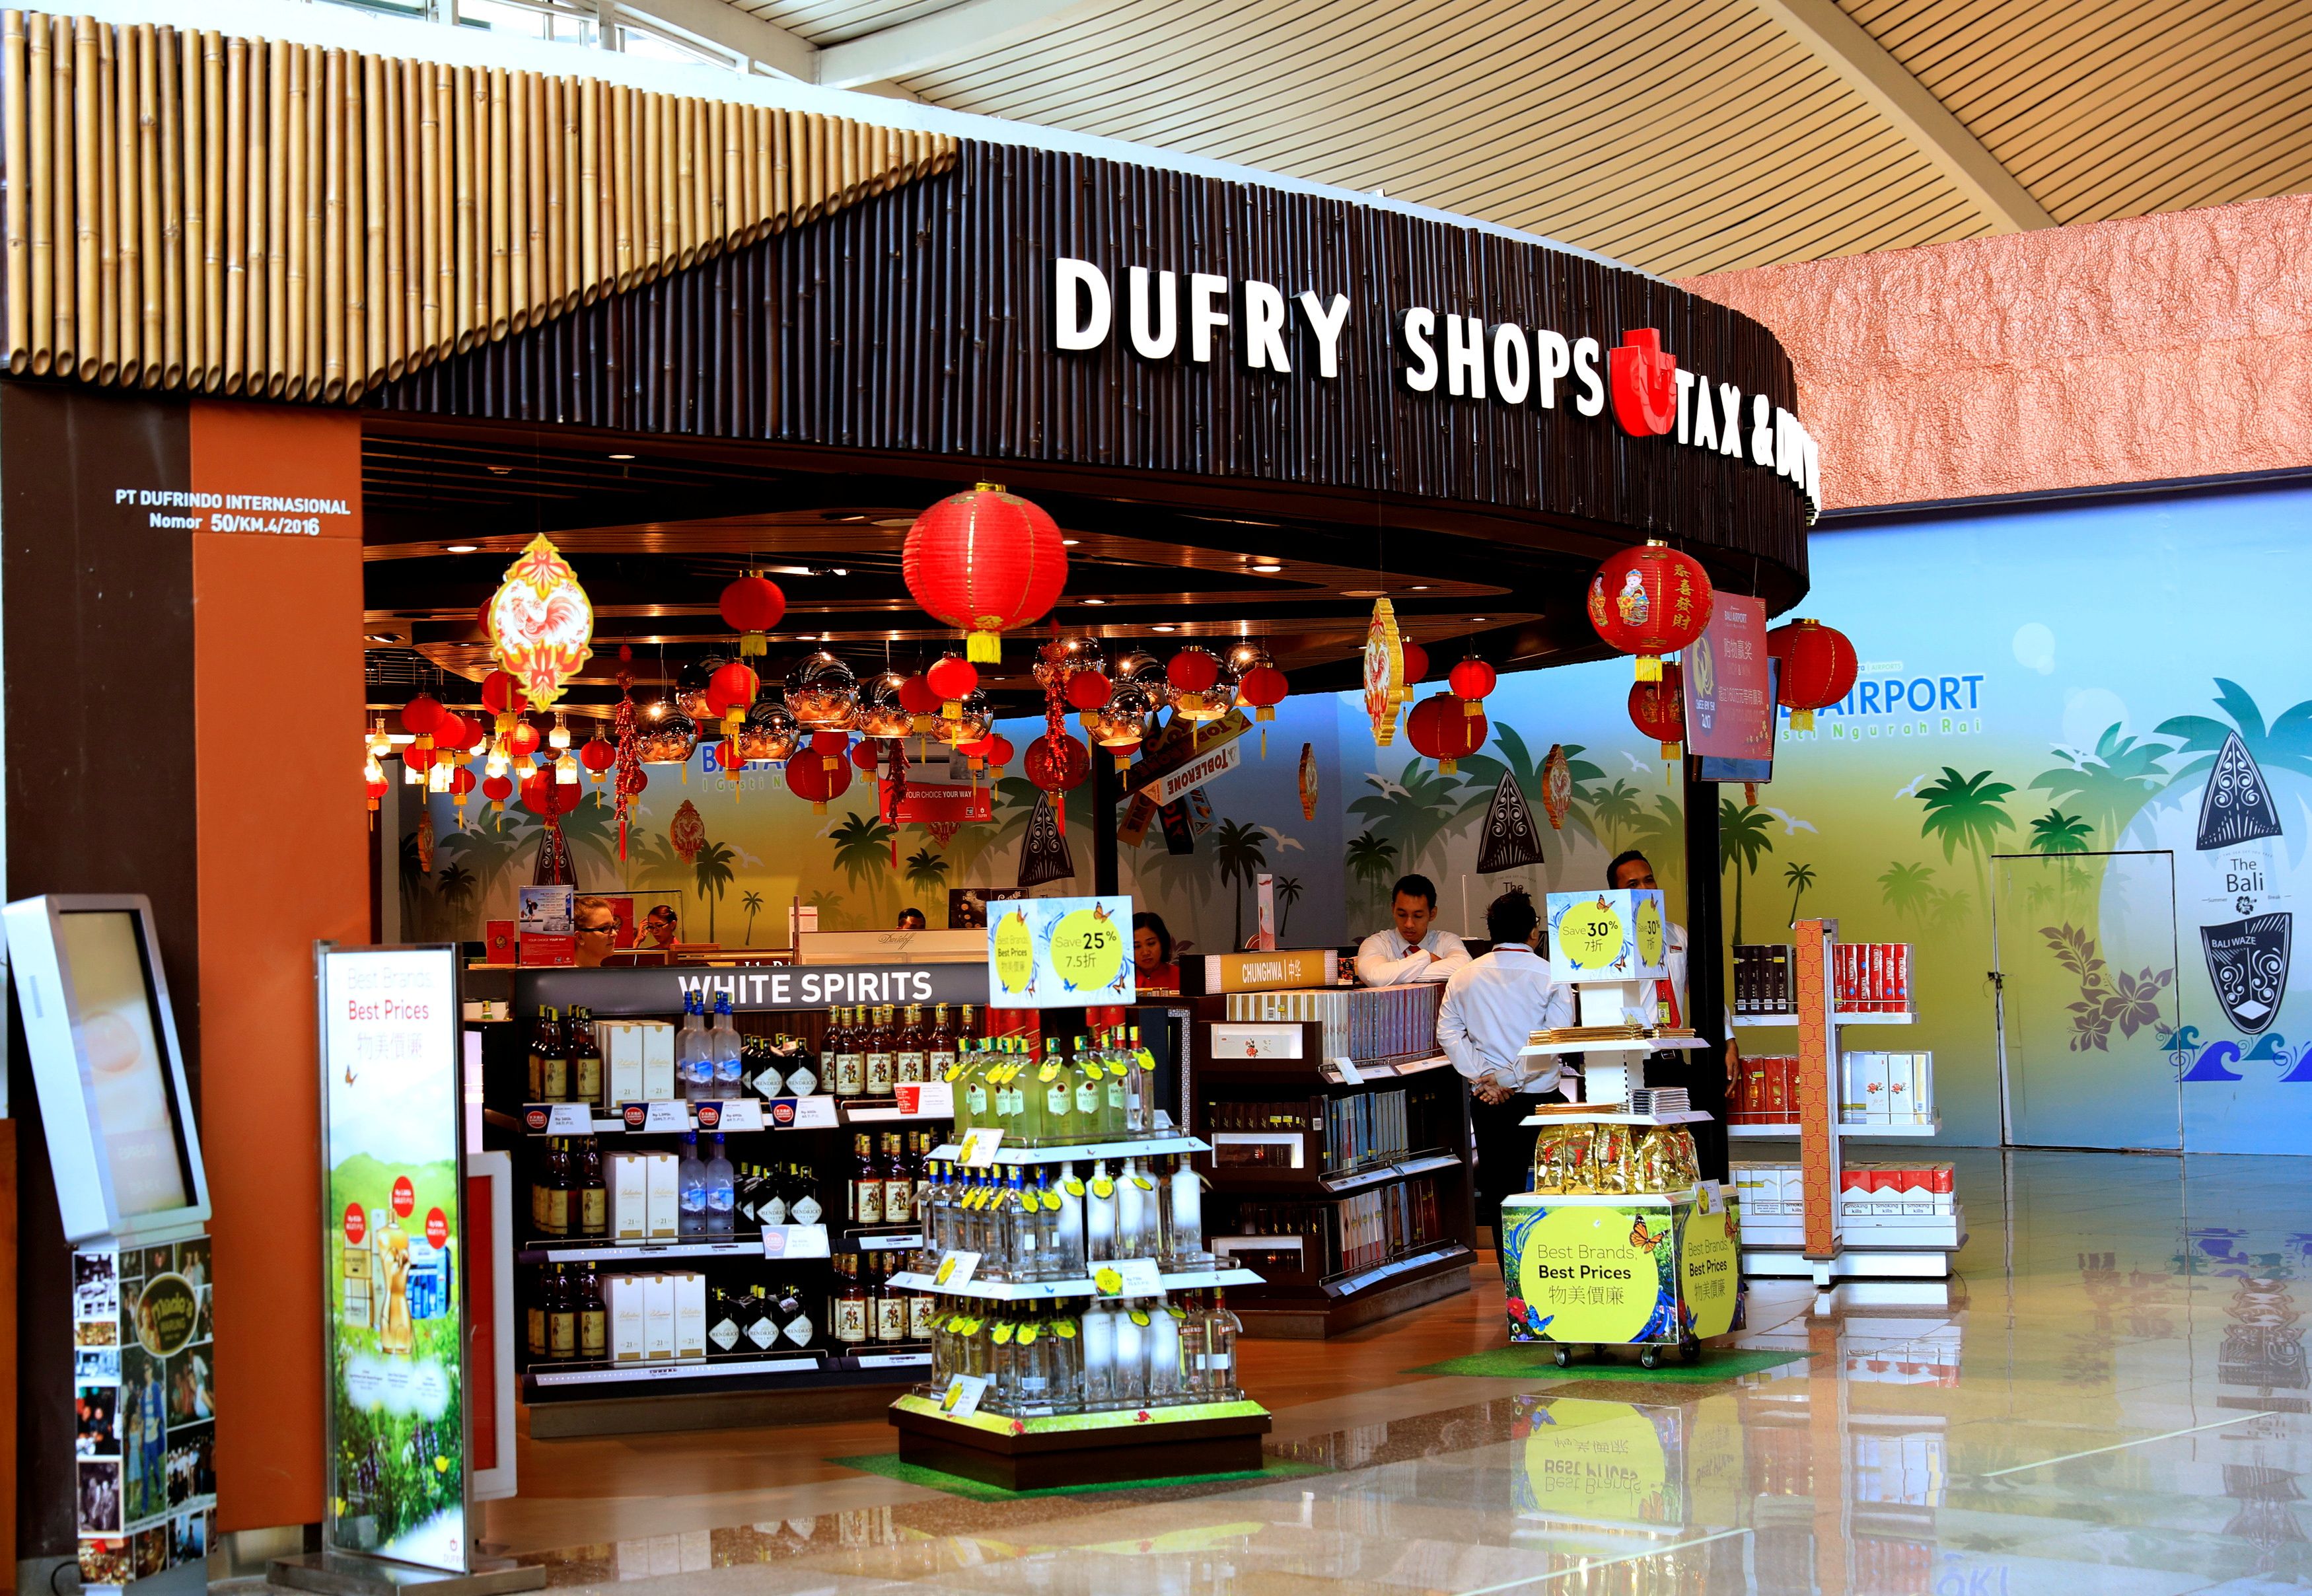 A duty free shop belonging the the Dufry group in a departure lounge at Denpassar international airport in Bali